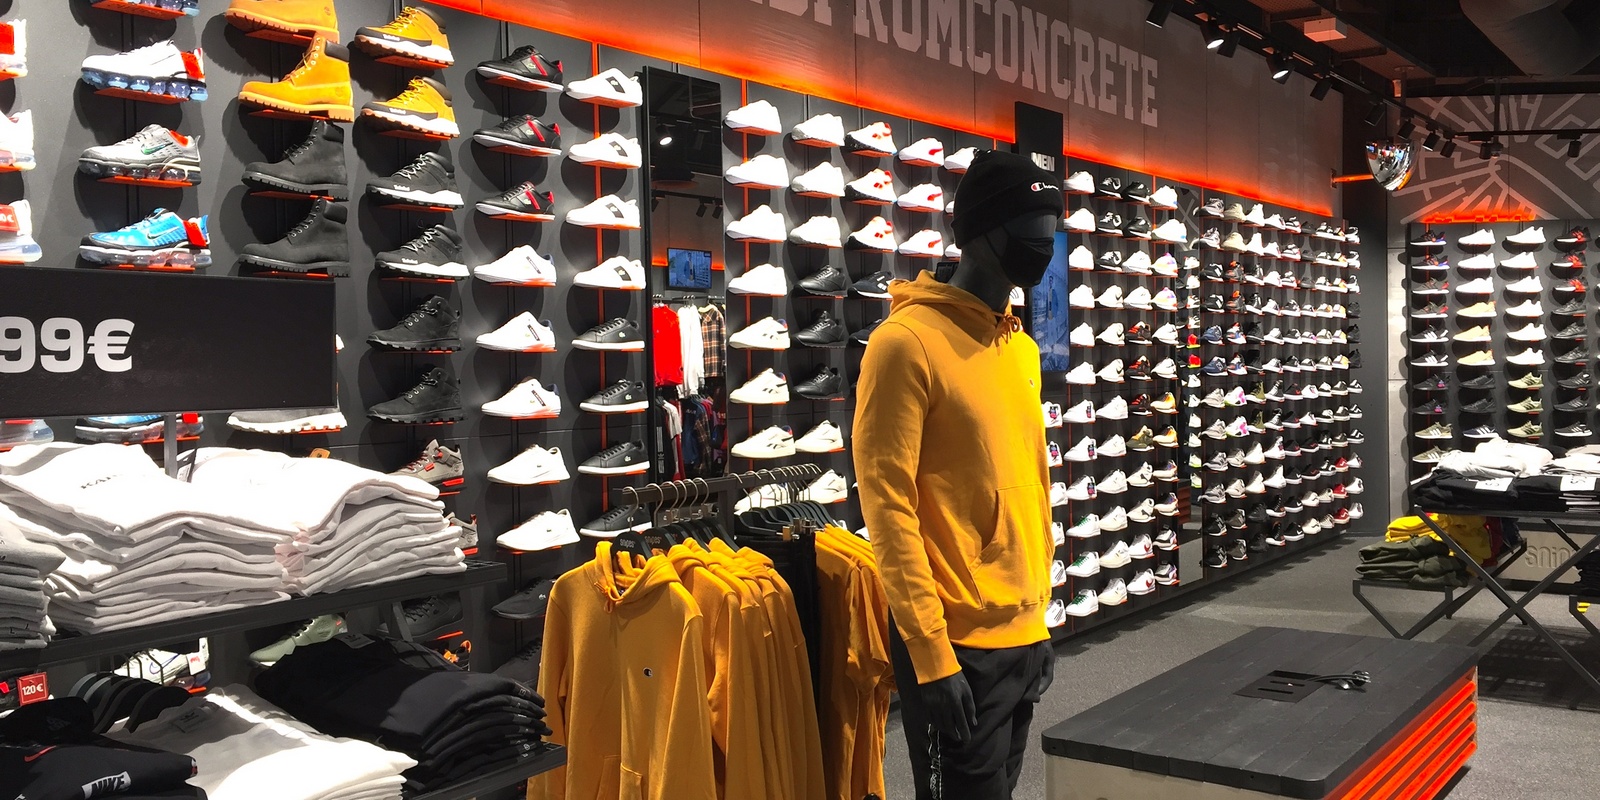 Snipes introduces a store concept at Berlin shopping center Die strengthening strategic partnership with Nike -